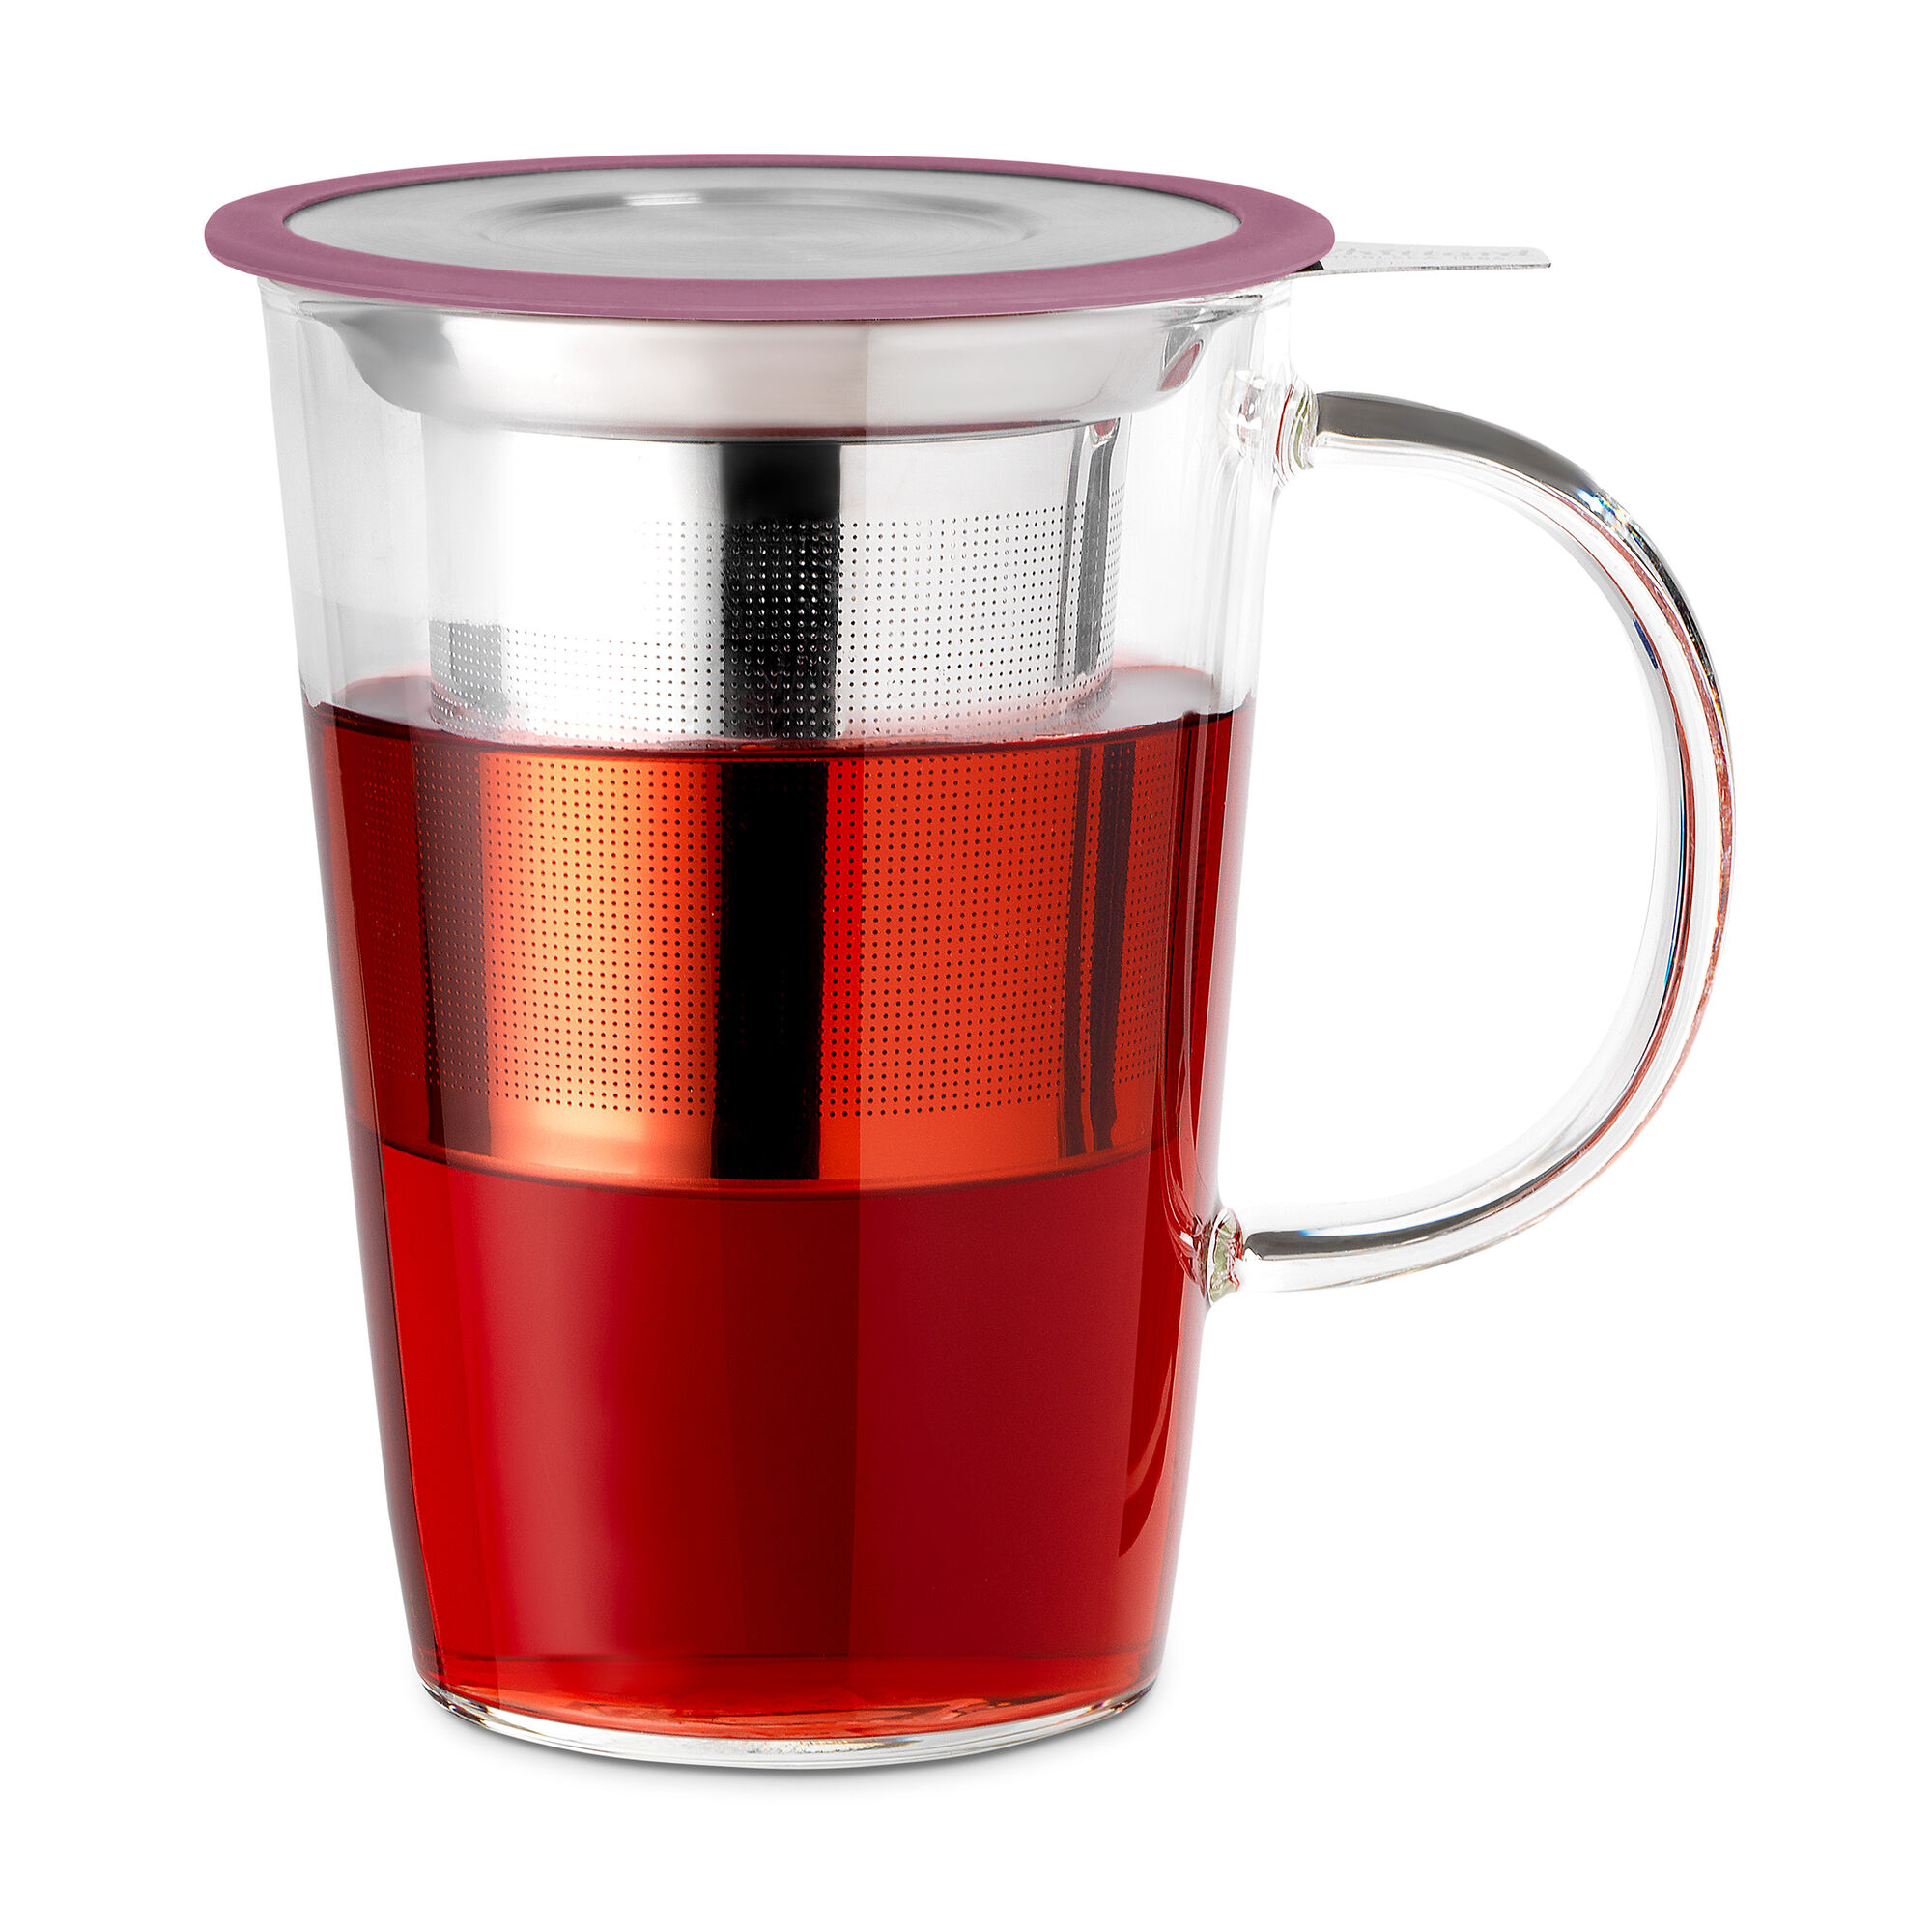 Simply place your loose tea into the pao, when infused remove the lid and place the infuser on top. Then ENJOY a great cuppa that you have created with minimal effort. Various colours available.
